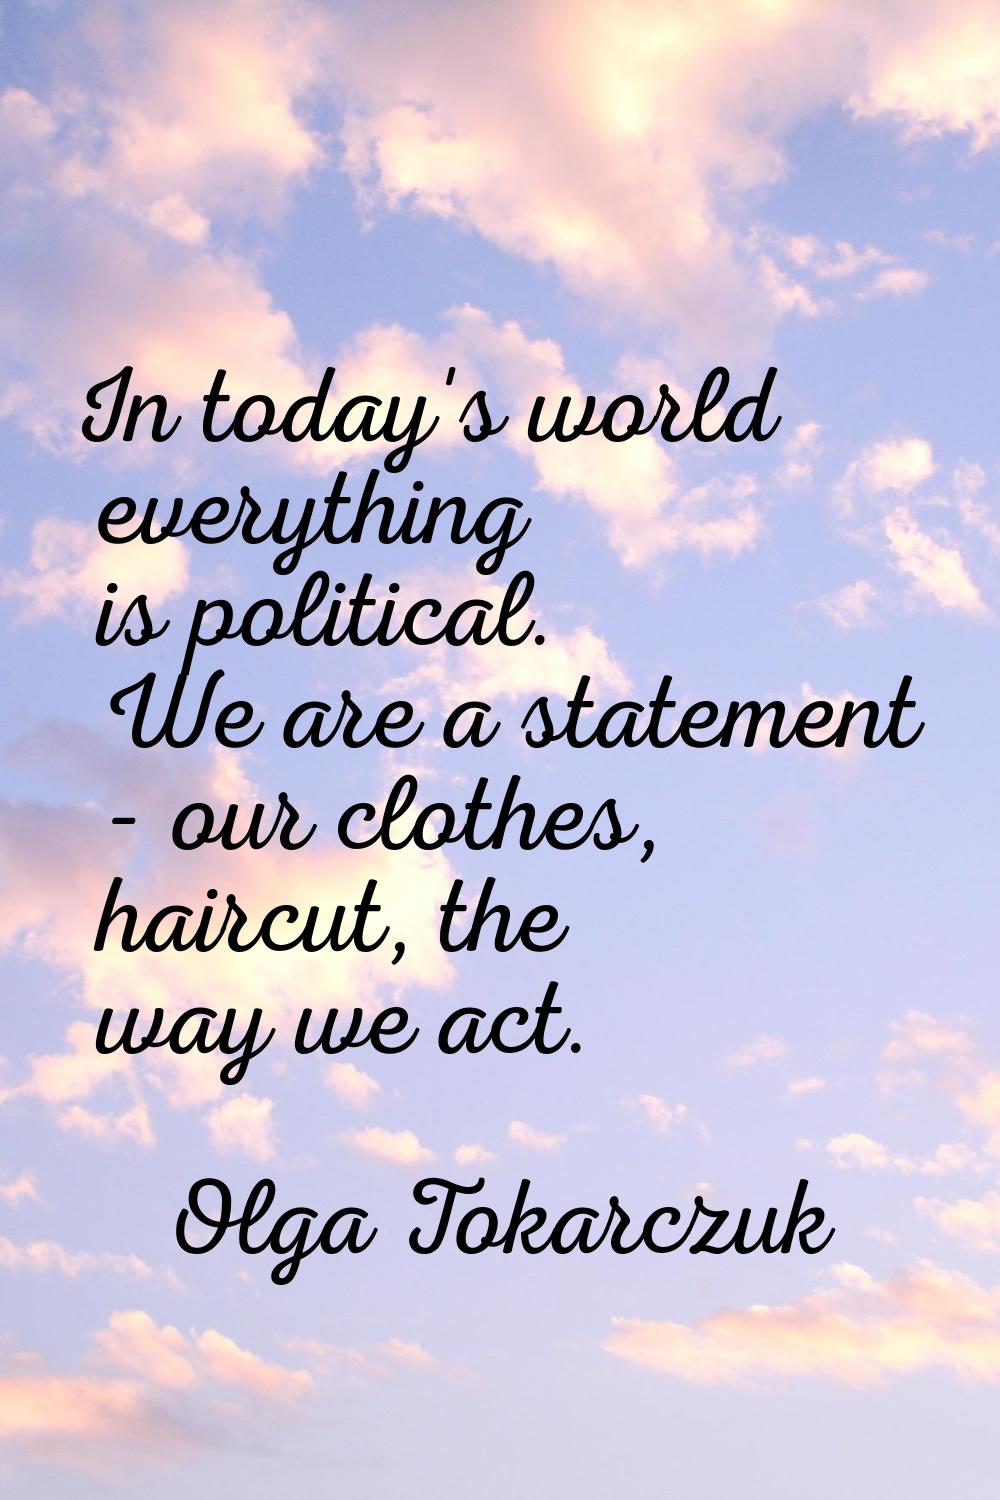 In today's world everything is political. We are a statement - our clothes, haircut, the way we act